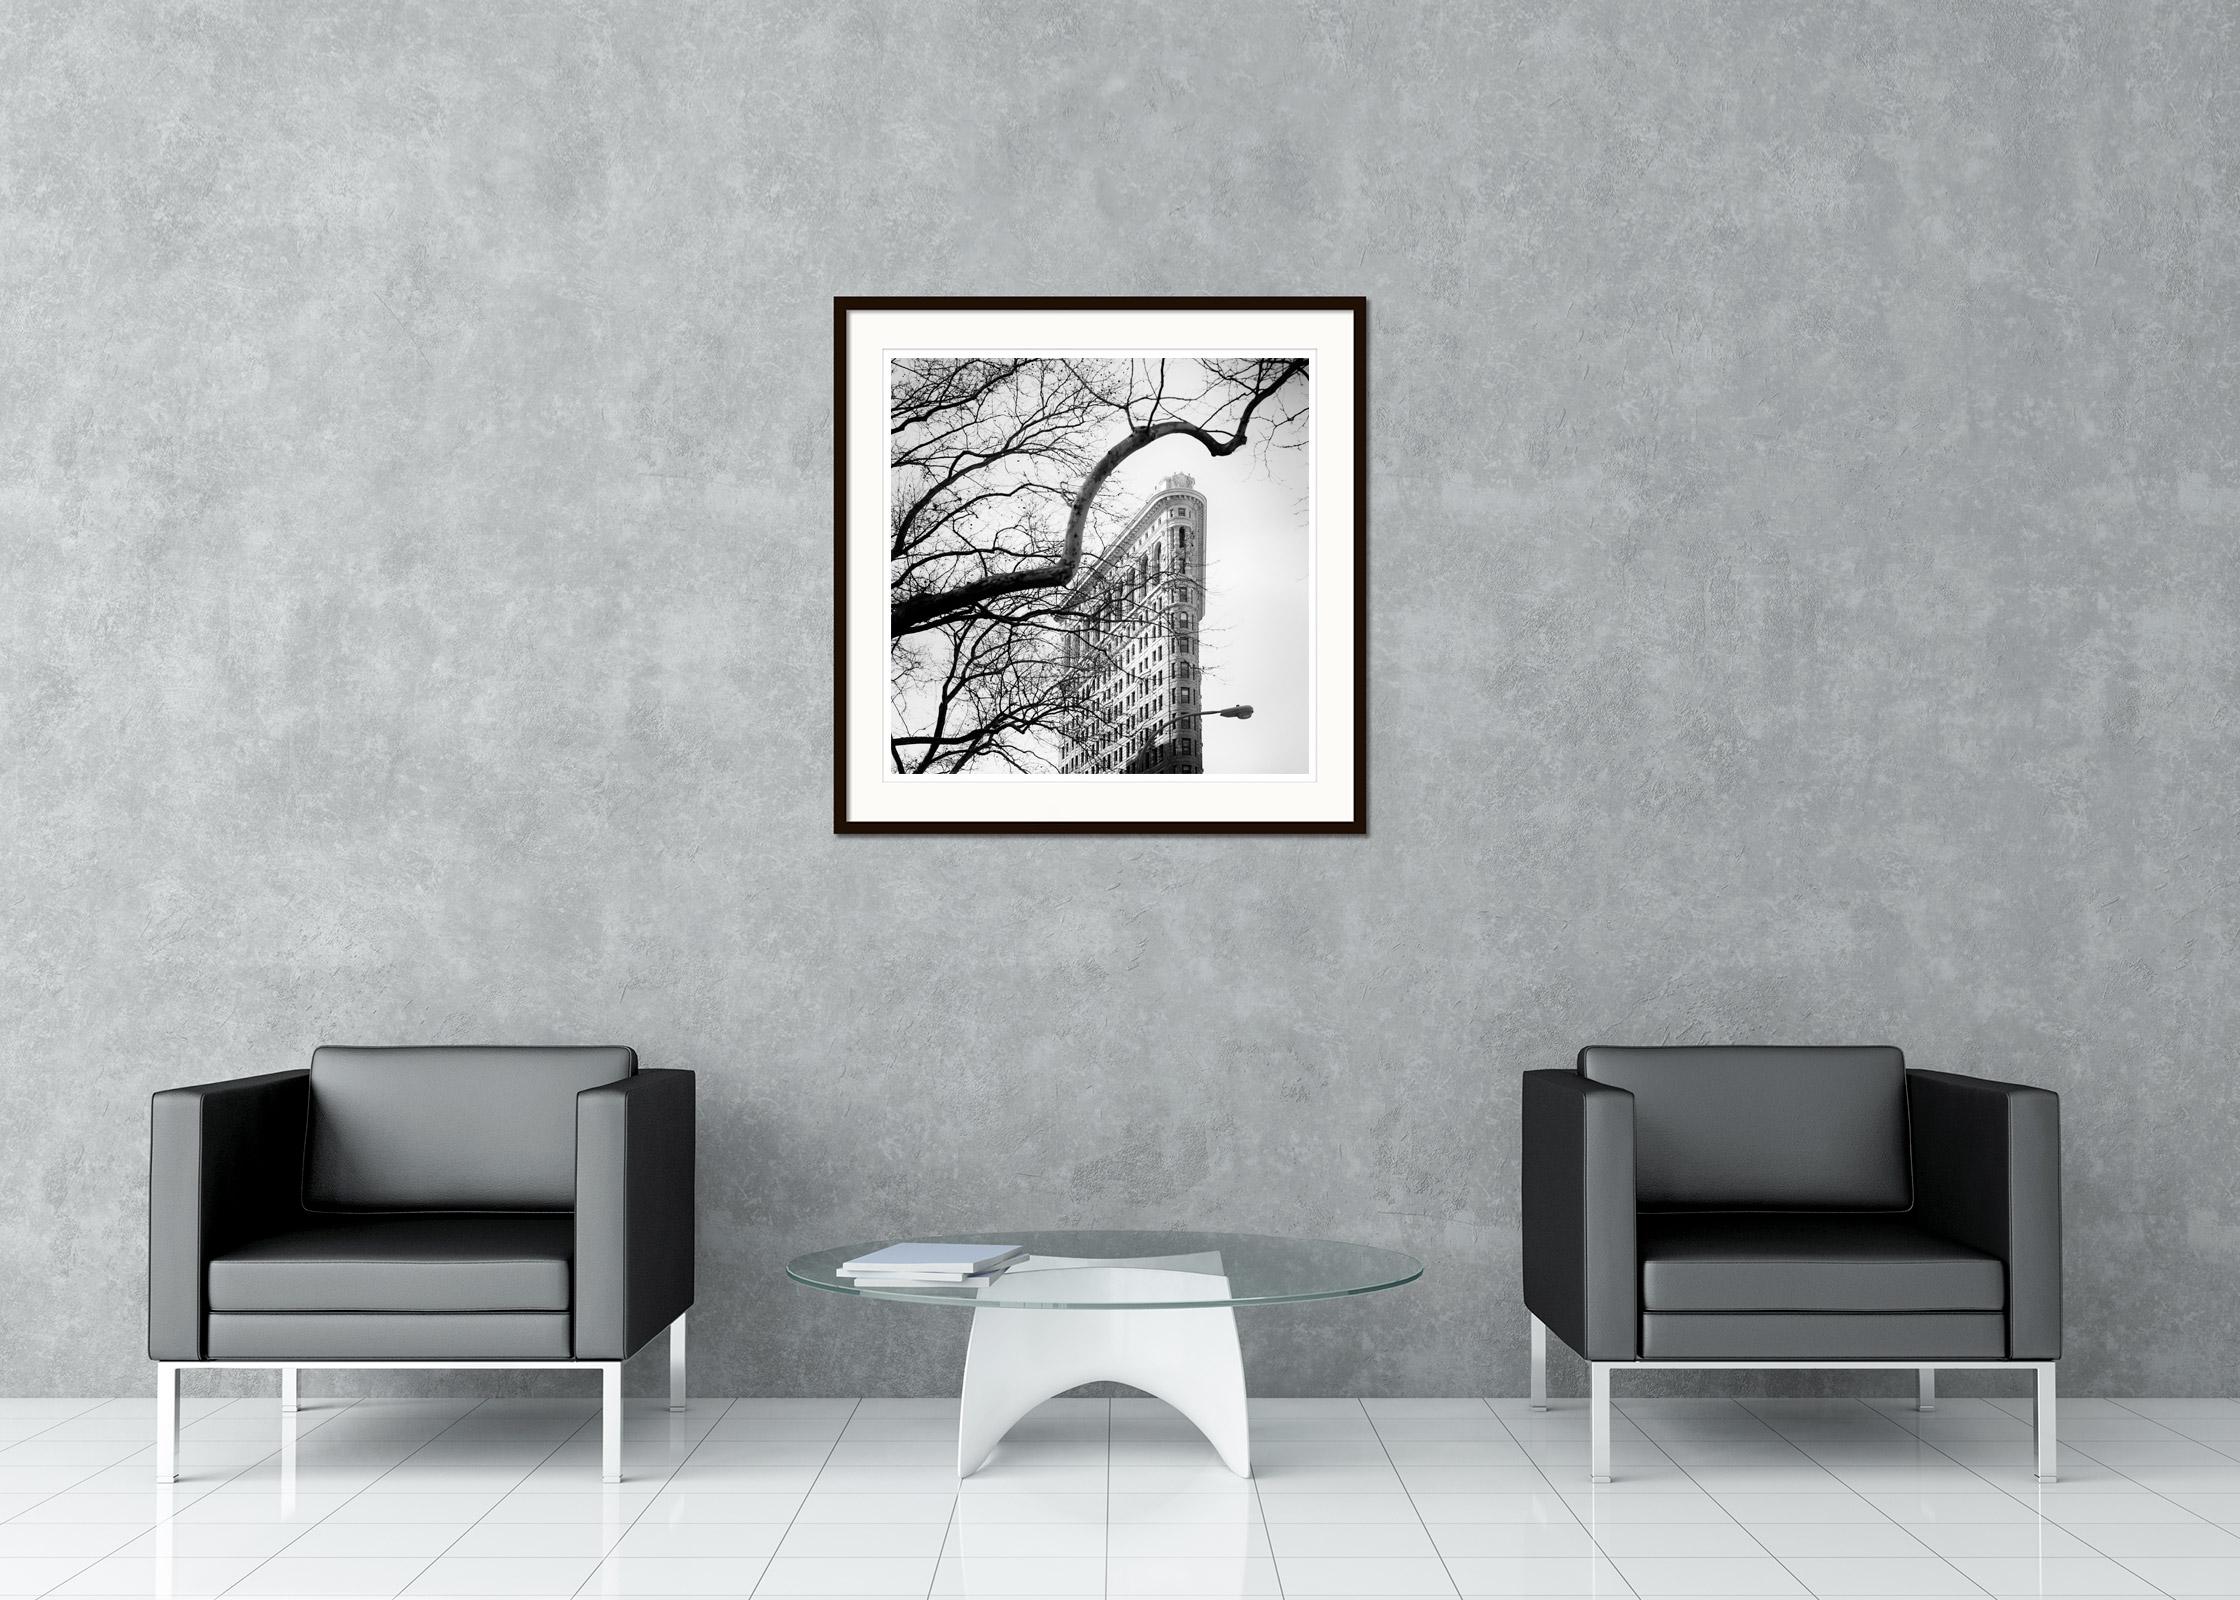 Black and white fine art cityscape - landscape photography. Archival pigment ink print as part of a limited edition of 9. All Gerald Berghammer prints are made to order in limited editions on Hahnemuehle Photo Rag Baryta. Each print is stamped on